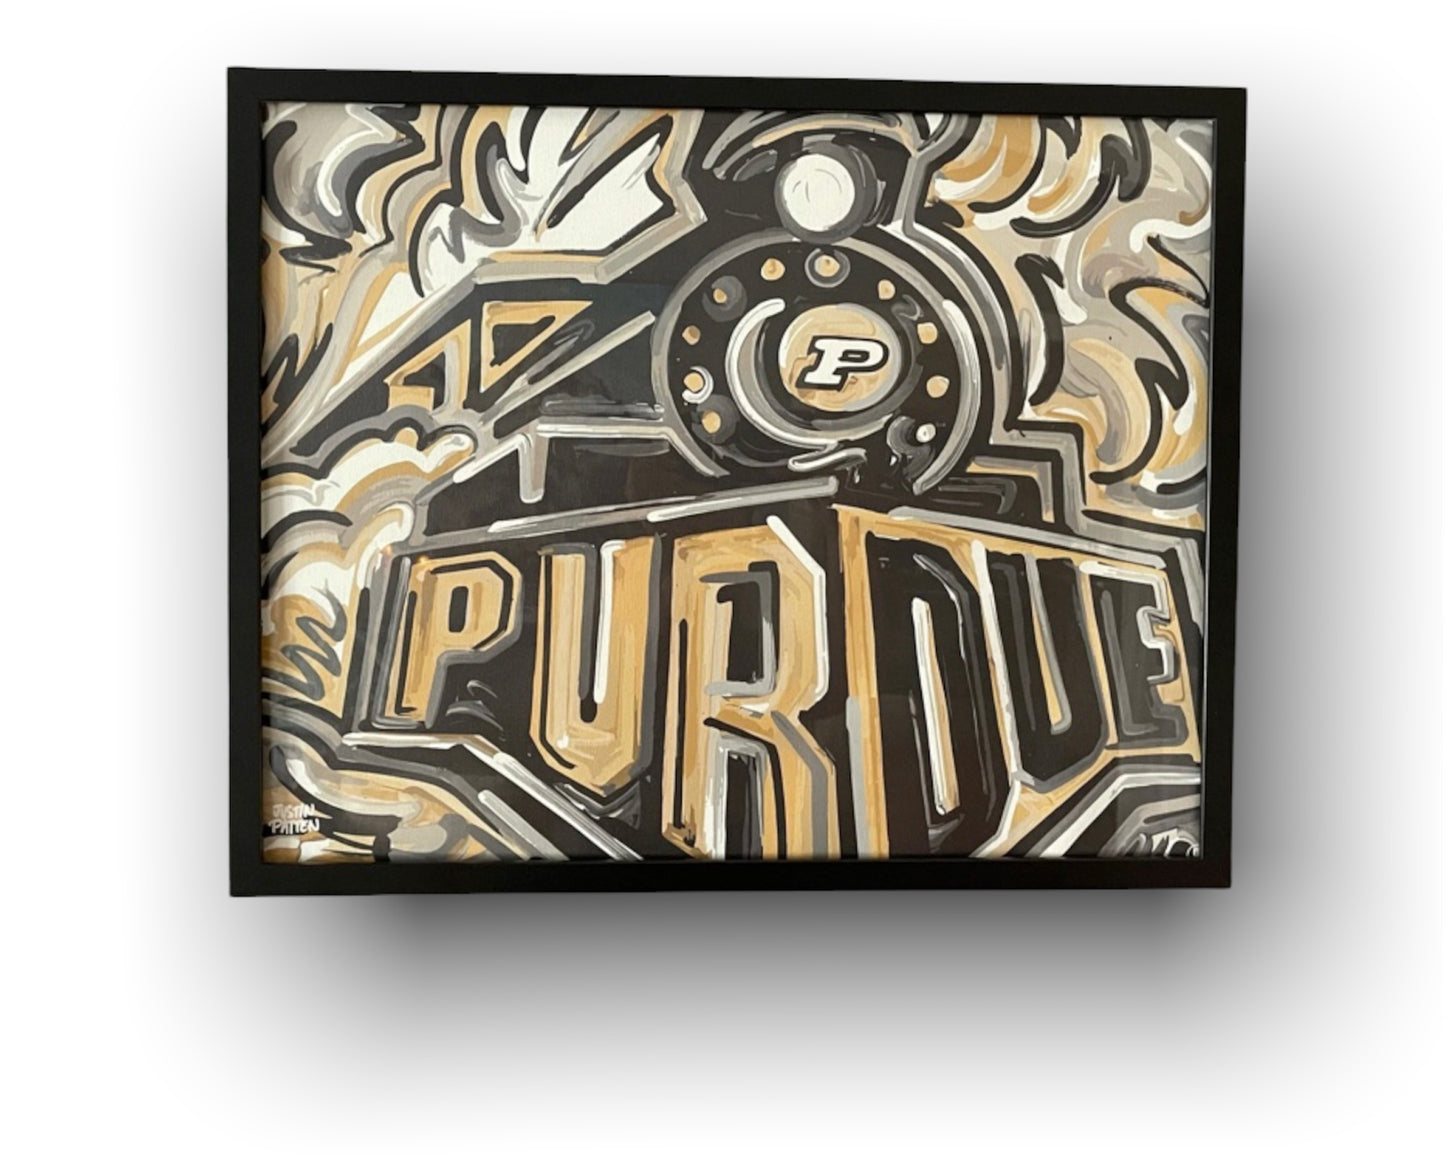 Purdue 20"x16" Boilermaker Special Vintage Style Print by Justin Patten